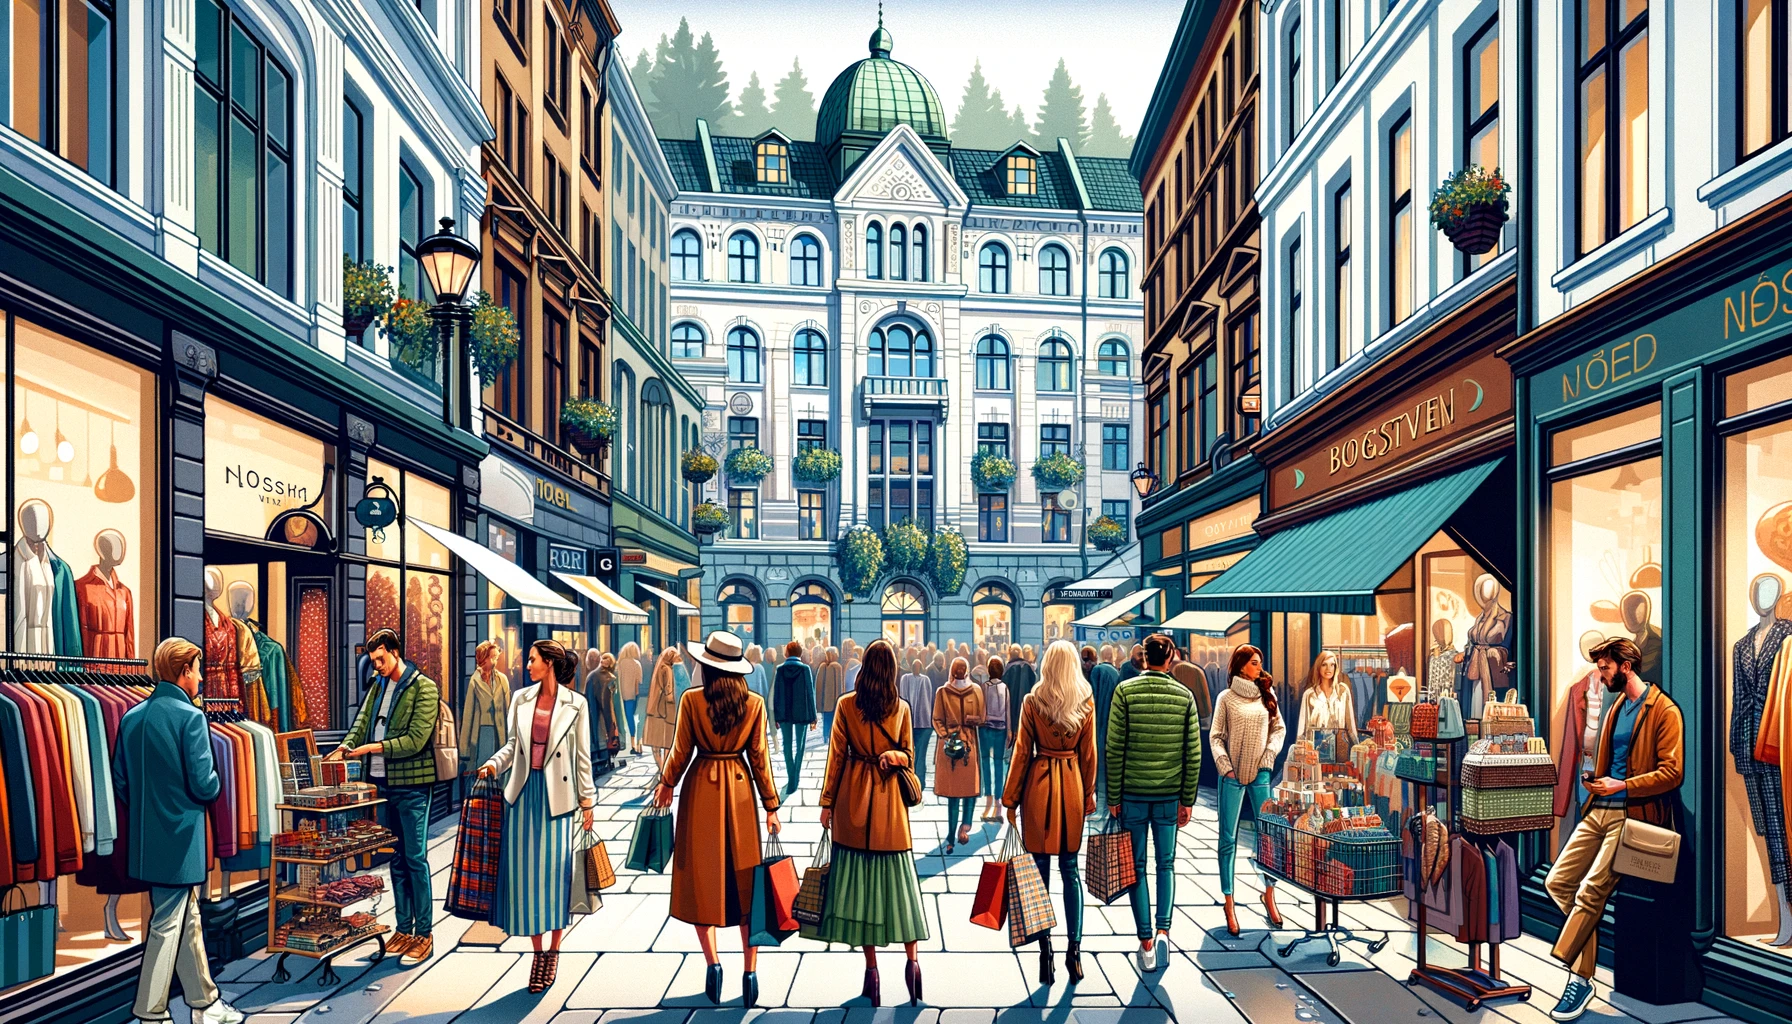 Oslo's premier shopping street, vibrant with fashion-forward individuals exploring a variety of shops